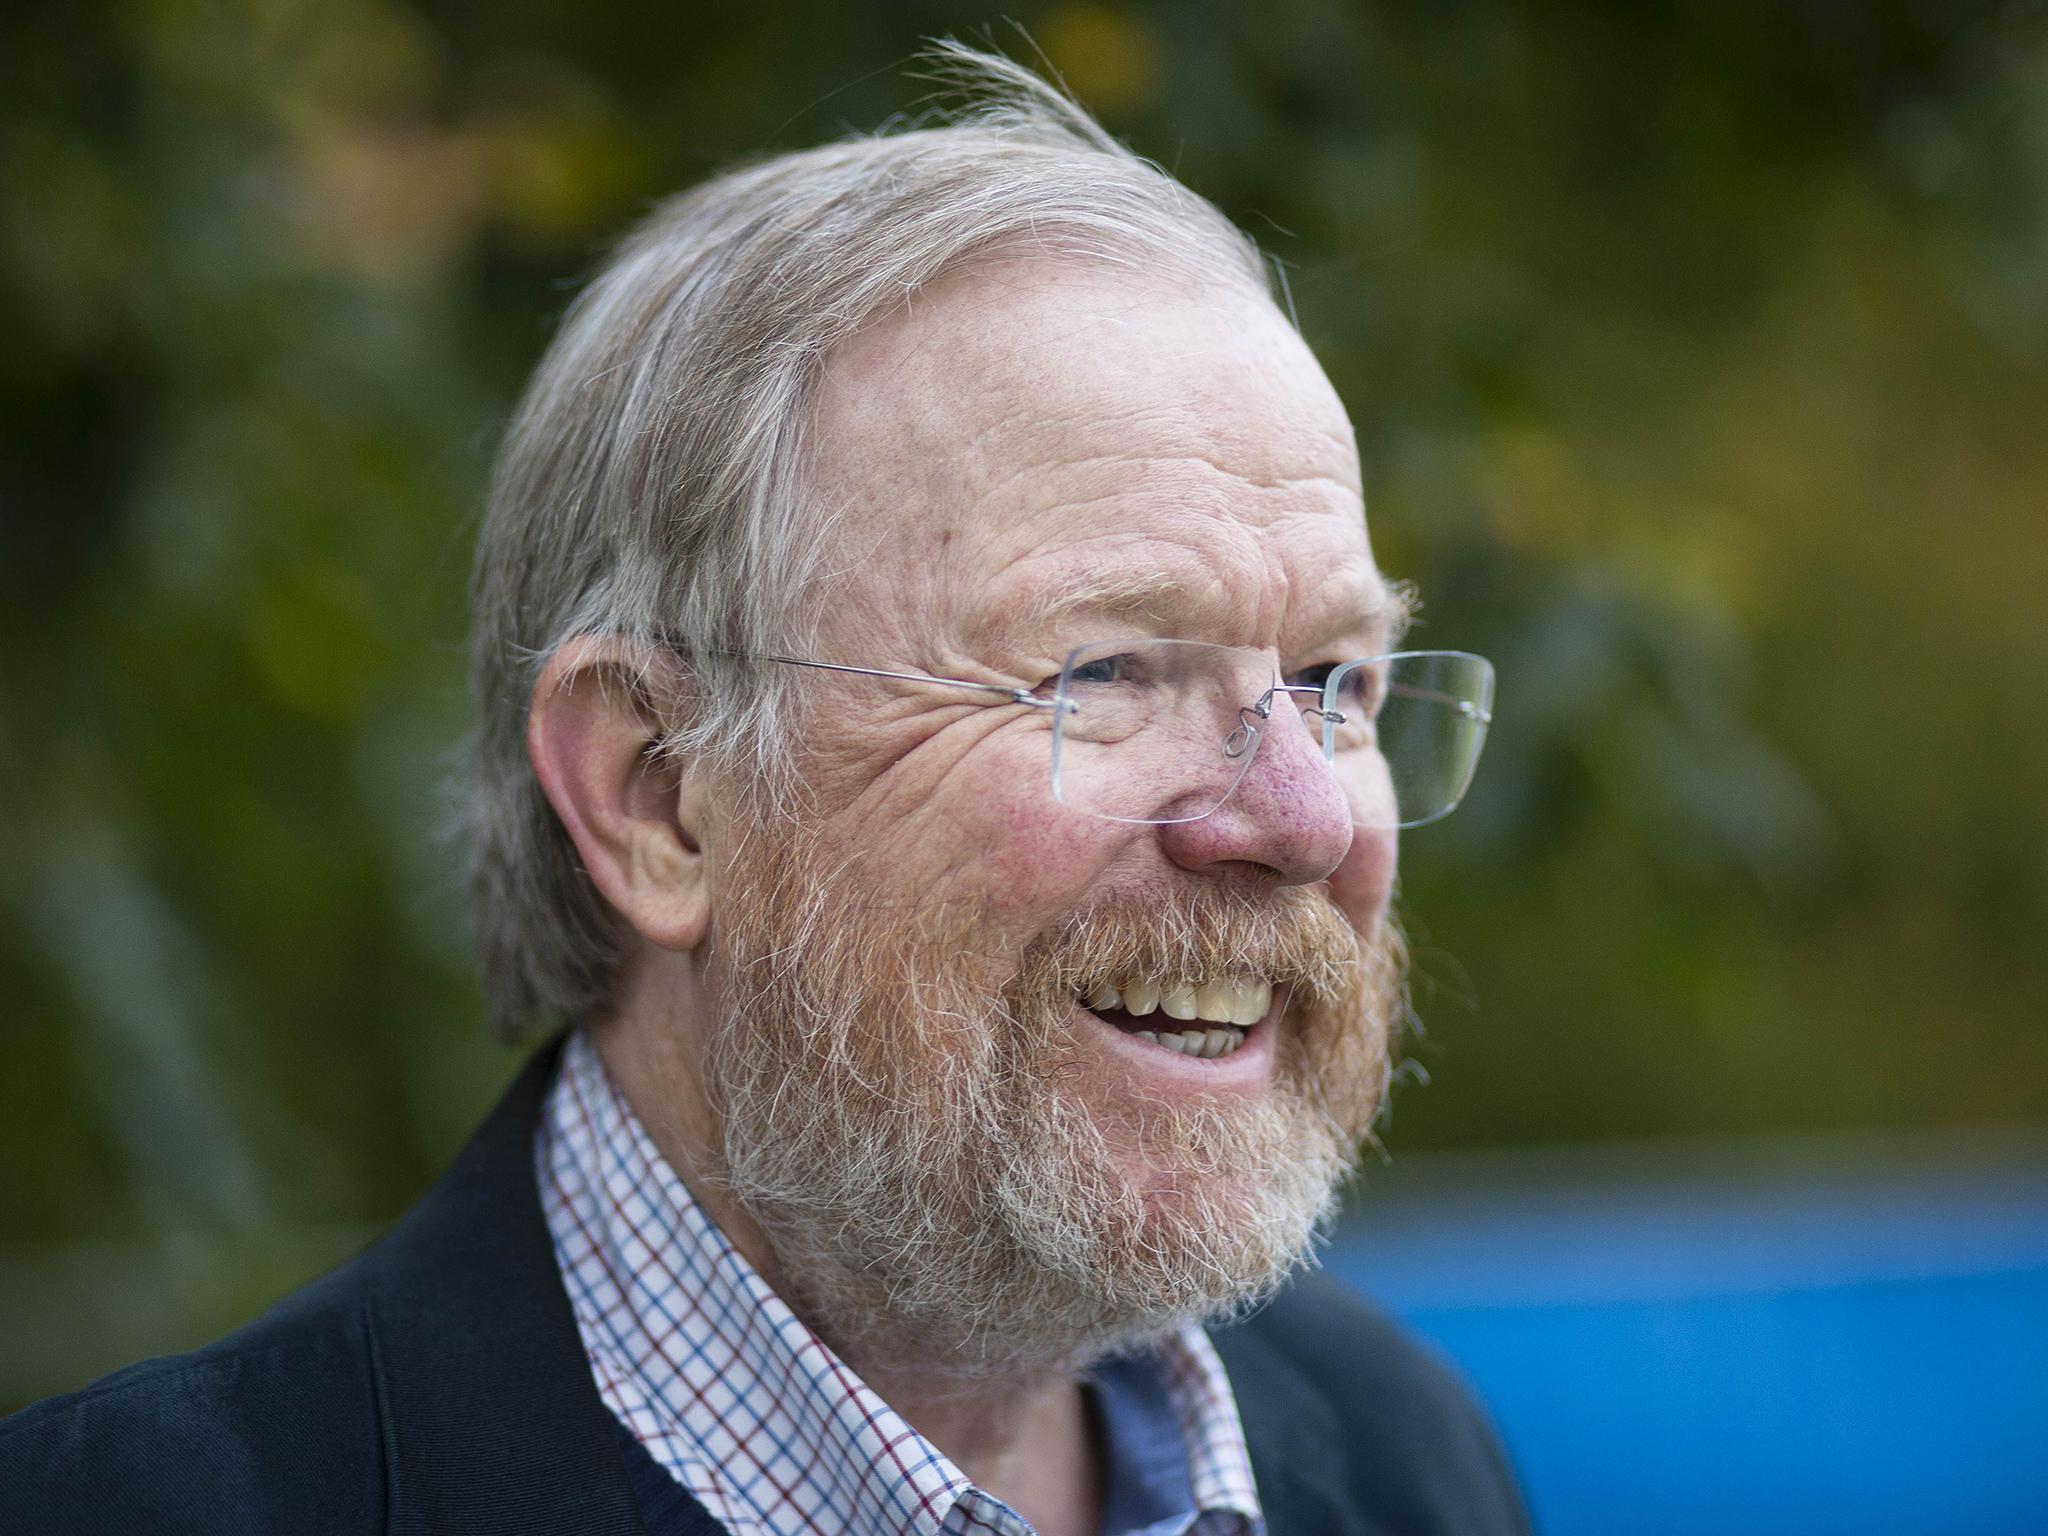 Bill Bryson’s ‘Notes from a Small Island’ is celebrating its 20th birthday this year